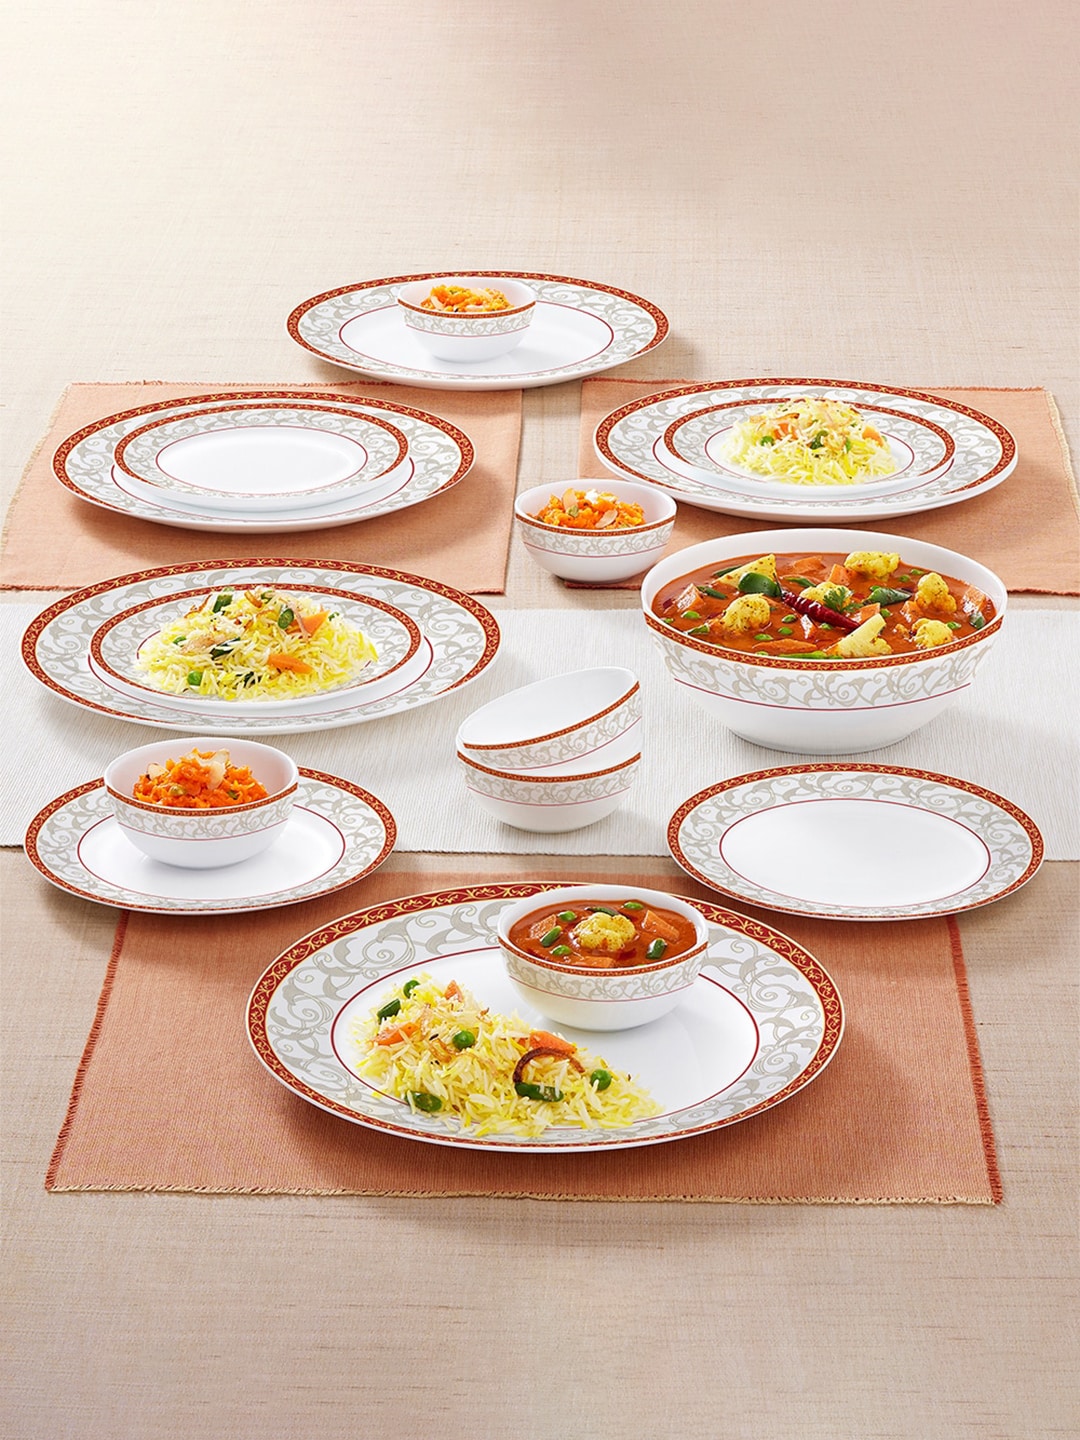 Larah by BOROSIL kohinoor White & Red 19 Pieces Printed Opalware Glossy Dinner Set